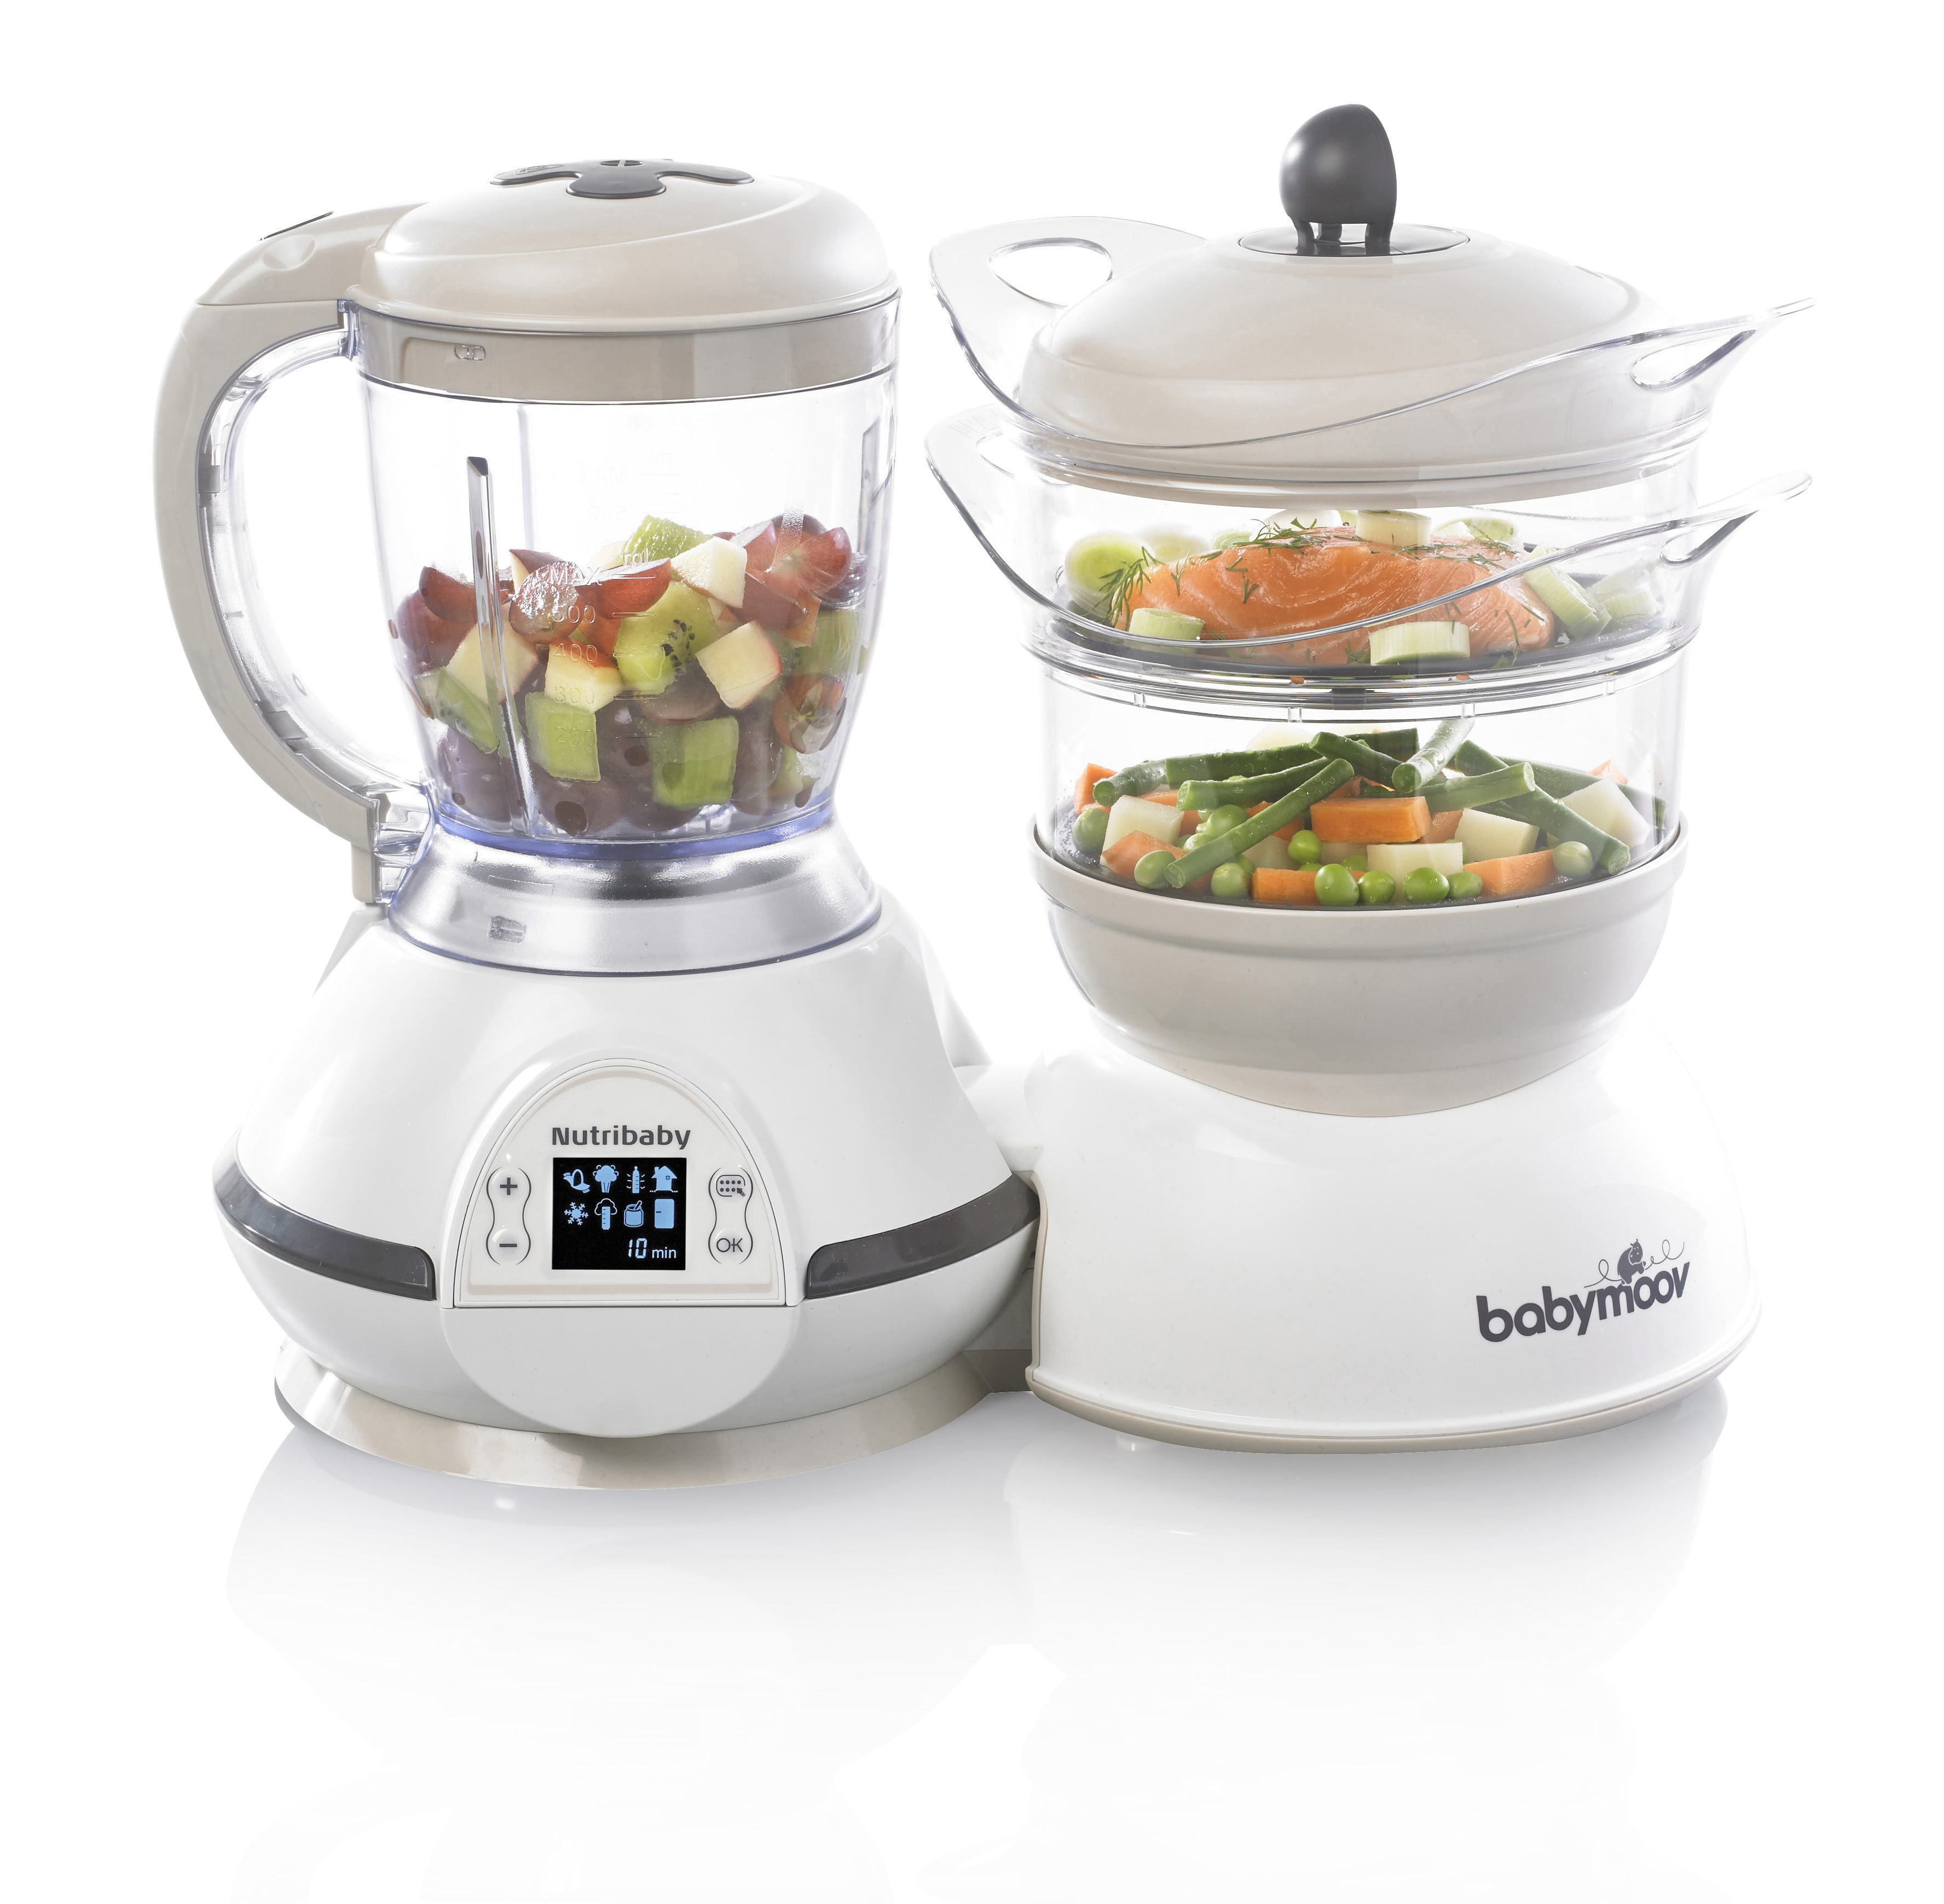 Babymoov Nutribaby - 5 in 1 Baby Food Maker with Steam Cooker, Blend &  Puree, Warmer, Defroster, Sterilizer (Cream)